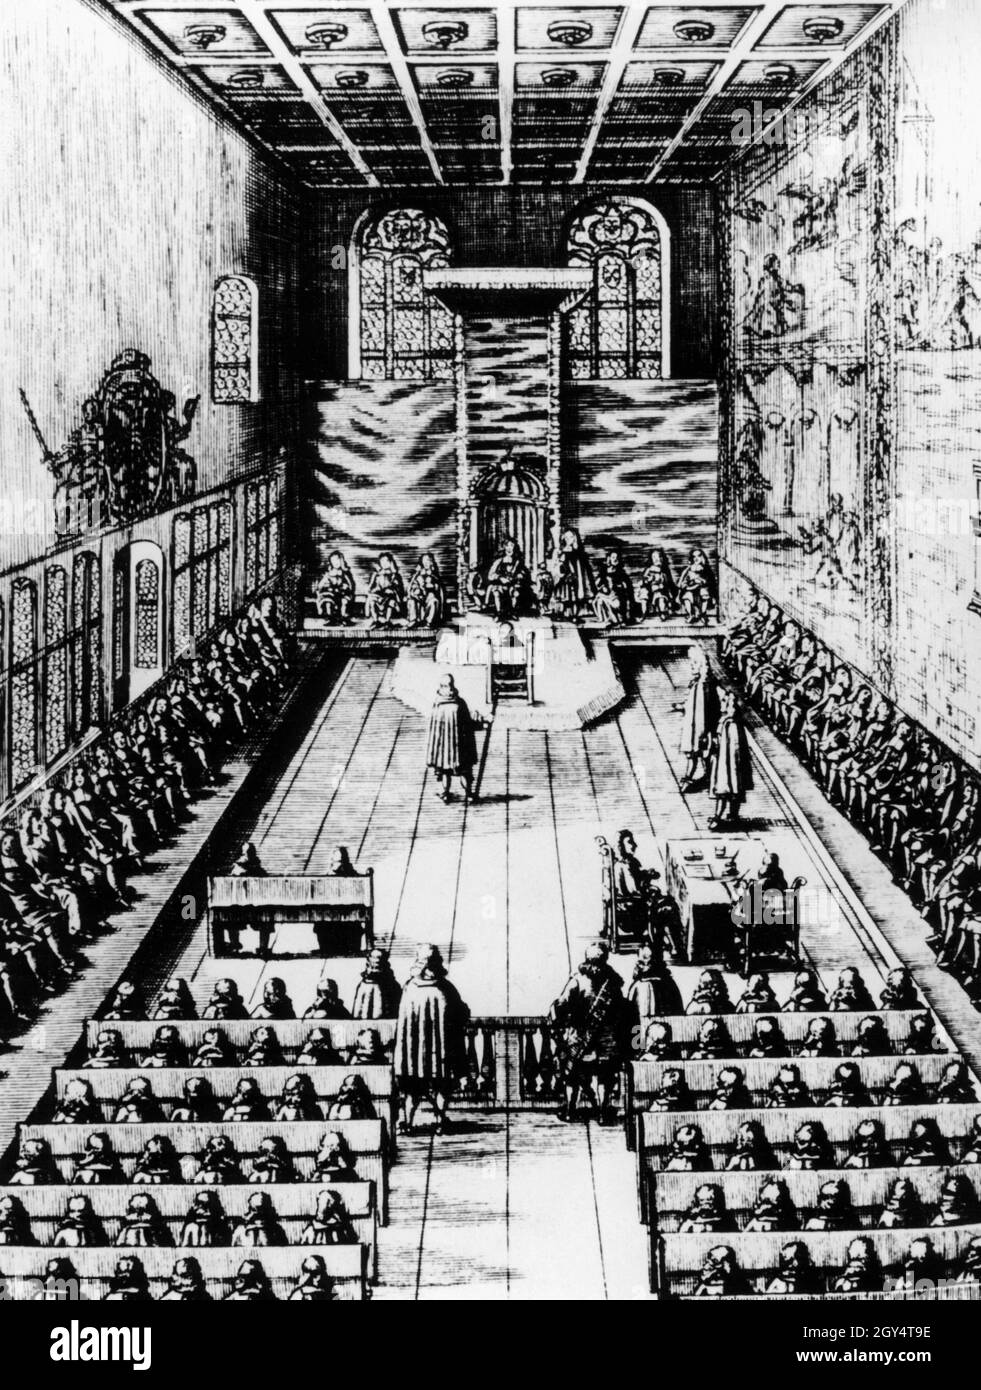 This copperplate engraving by Peter Troschel from 1675 shows a session of the Perpetual Diet in the Imperial Hall of the Old Town Hall in Regensburg. The Emperor sat on the throne, behind him the Electors, on the left the secular princes, on the right the clergy and in the foreground representatives of the imperial cities. [automated translation] Stock Photo